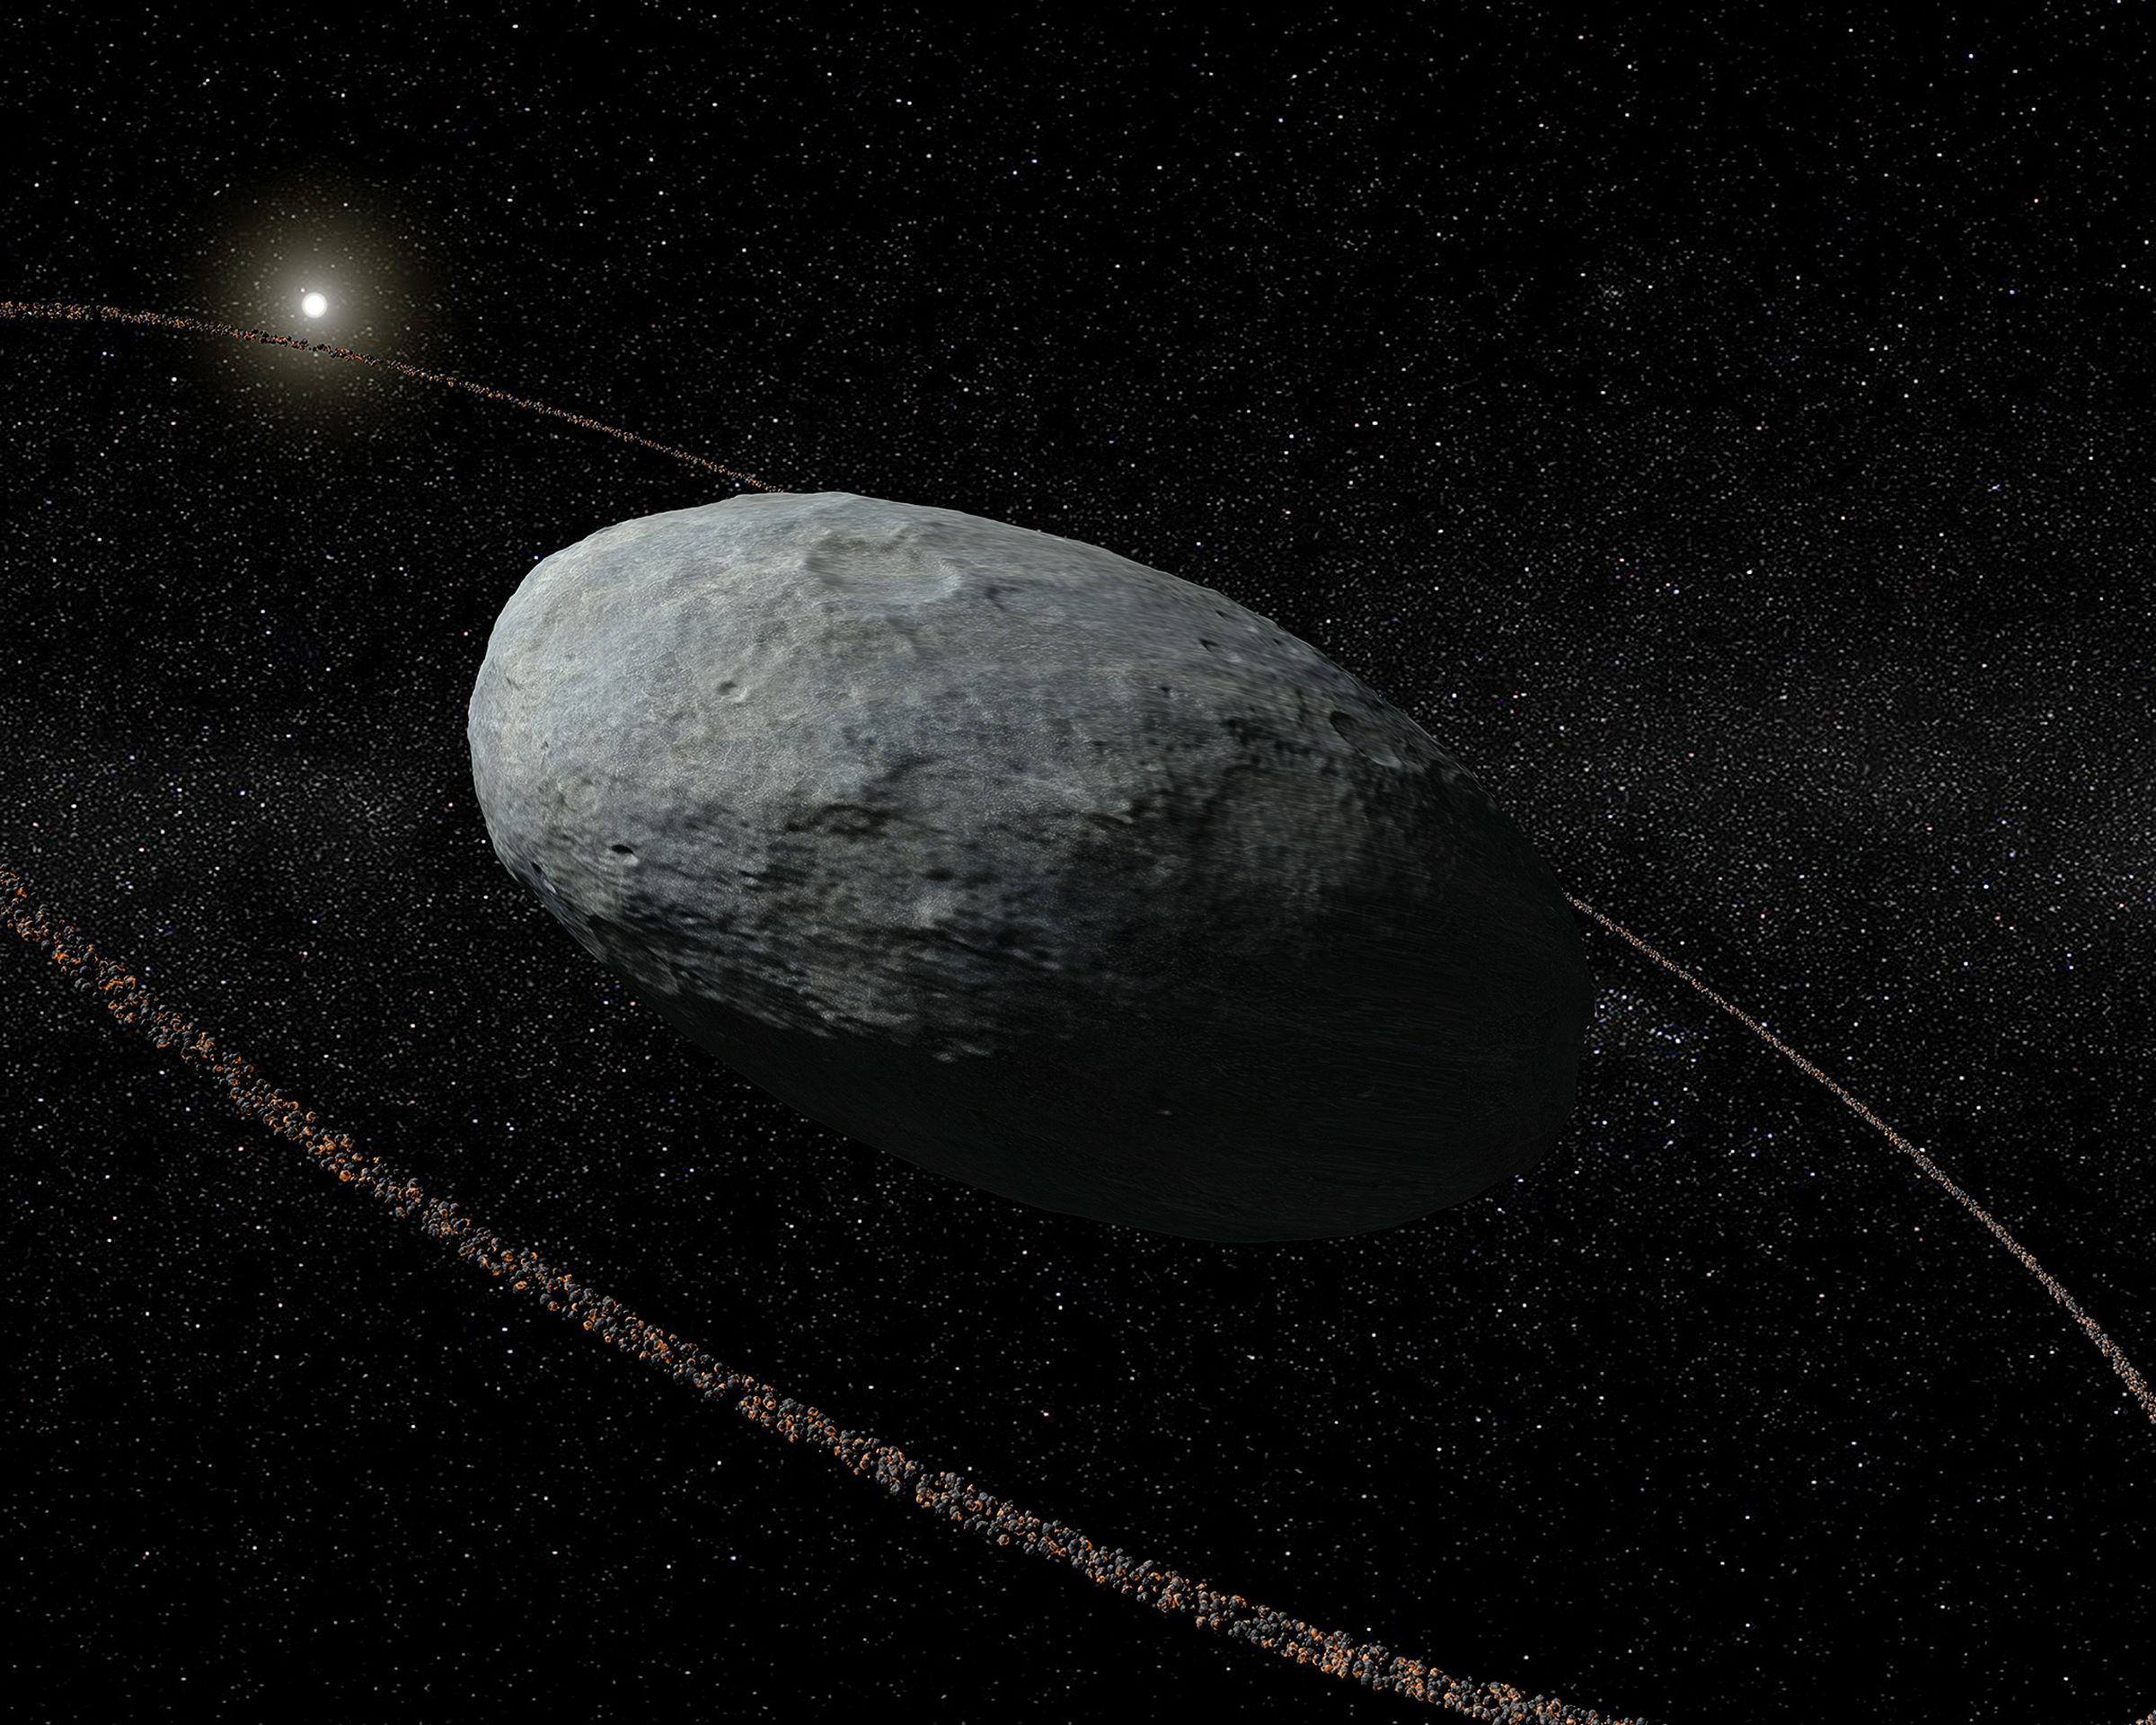 An artistic rendering of Haumea and its rings